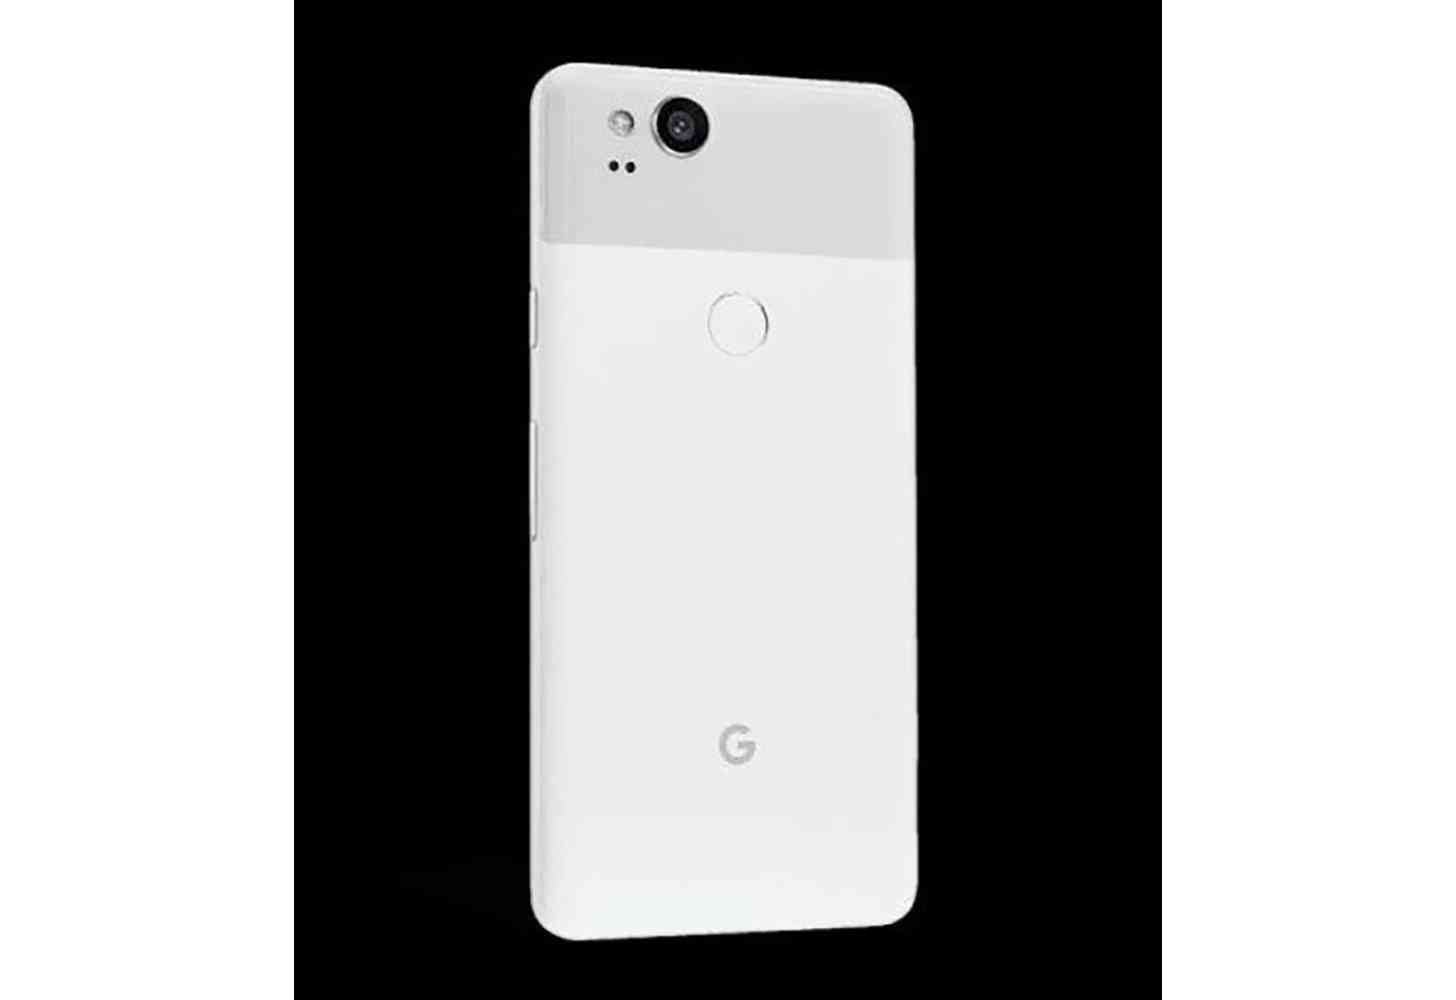 Google Pixel 2 colors leak Clearly White